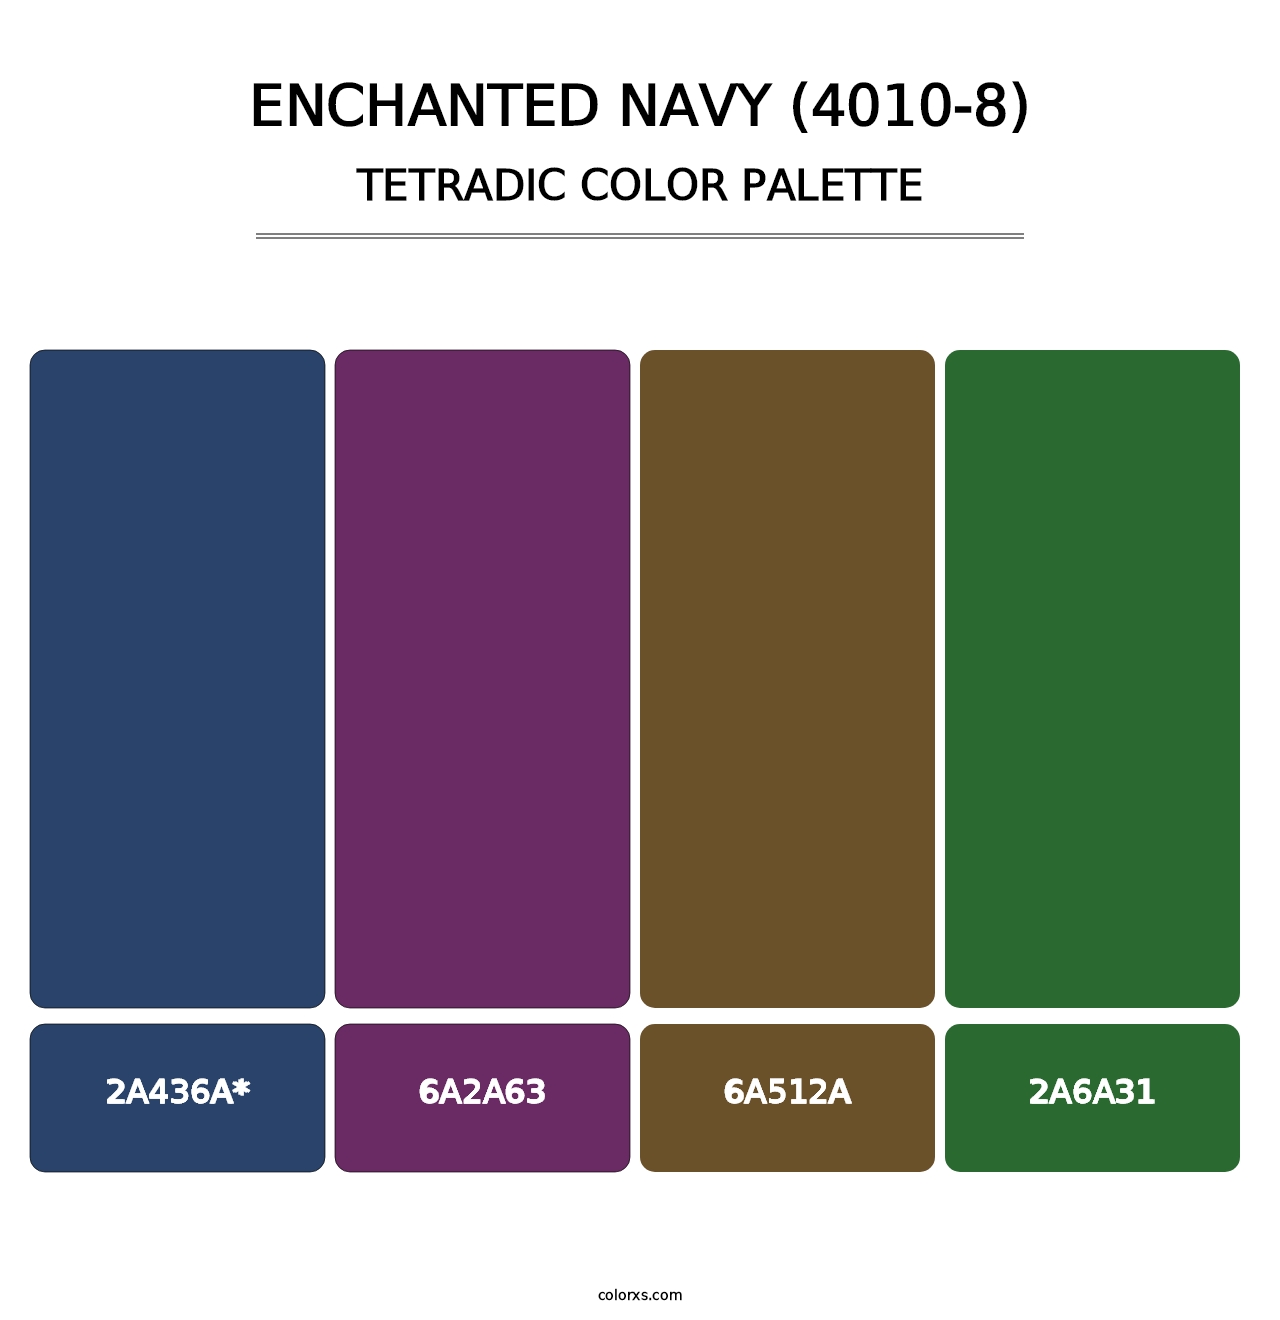 Enchanted Navy (4010-8) - Tetradic Color Palette